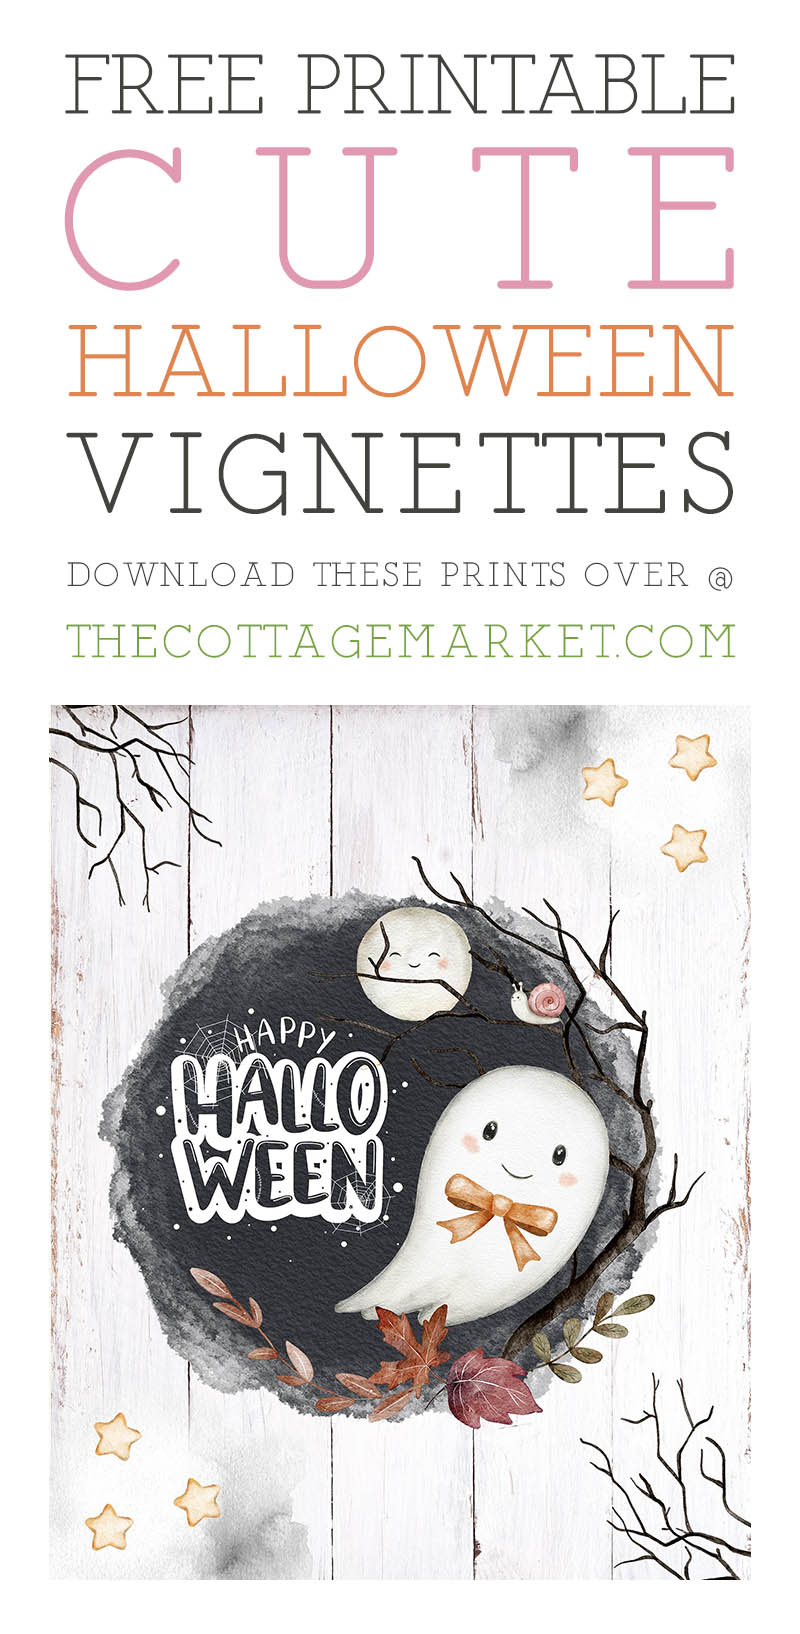 It's time to decorate for Halloween and today we have the most awesome Free Printable Cute Halloween Vignettes and I mean CUTE!!!